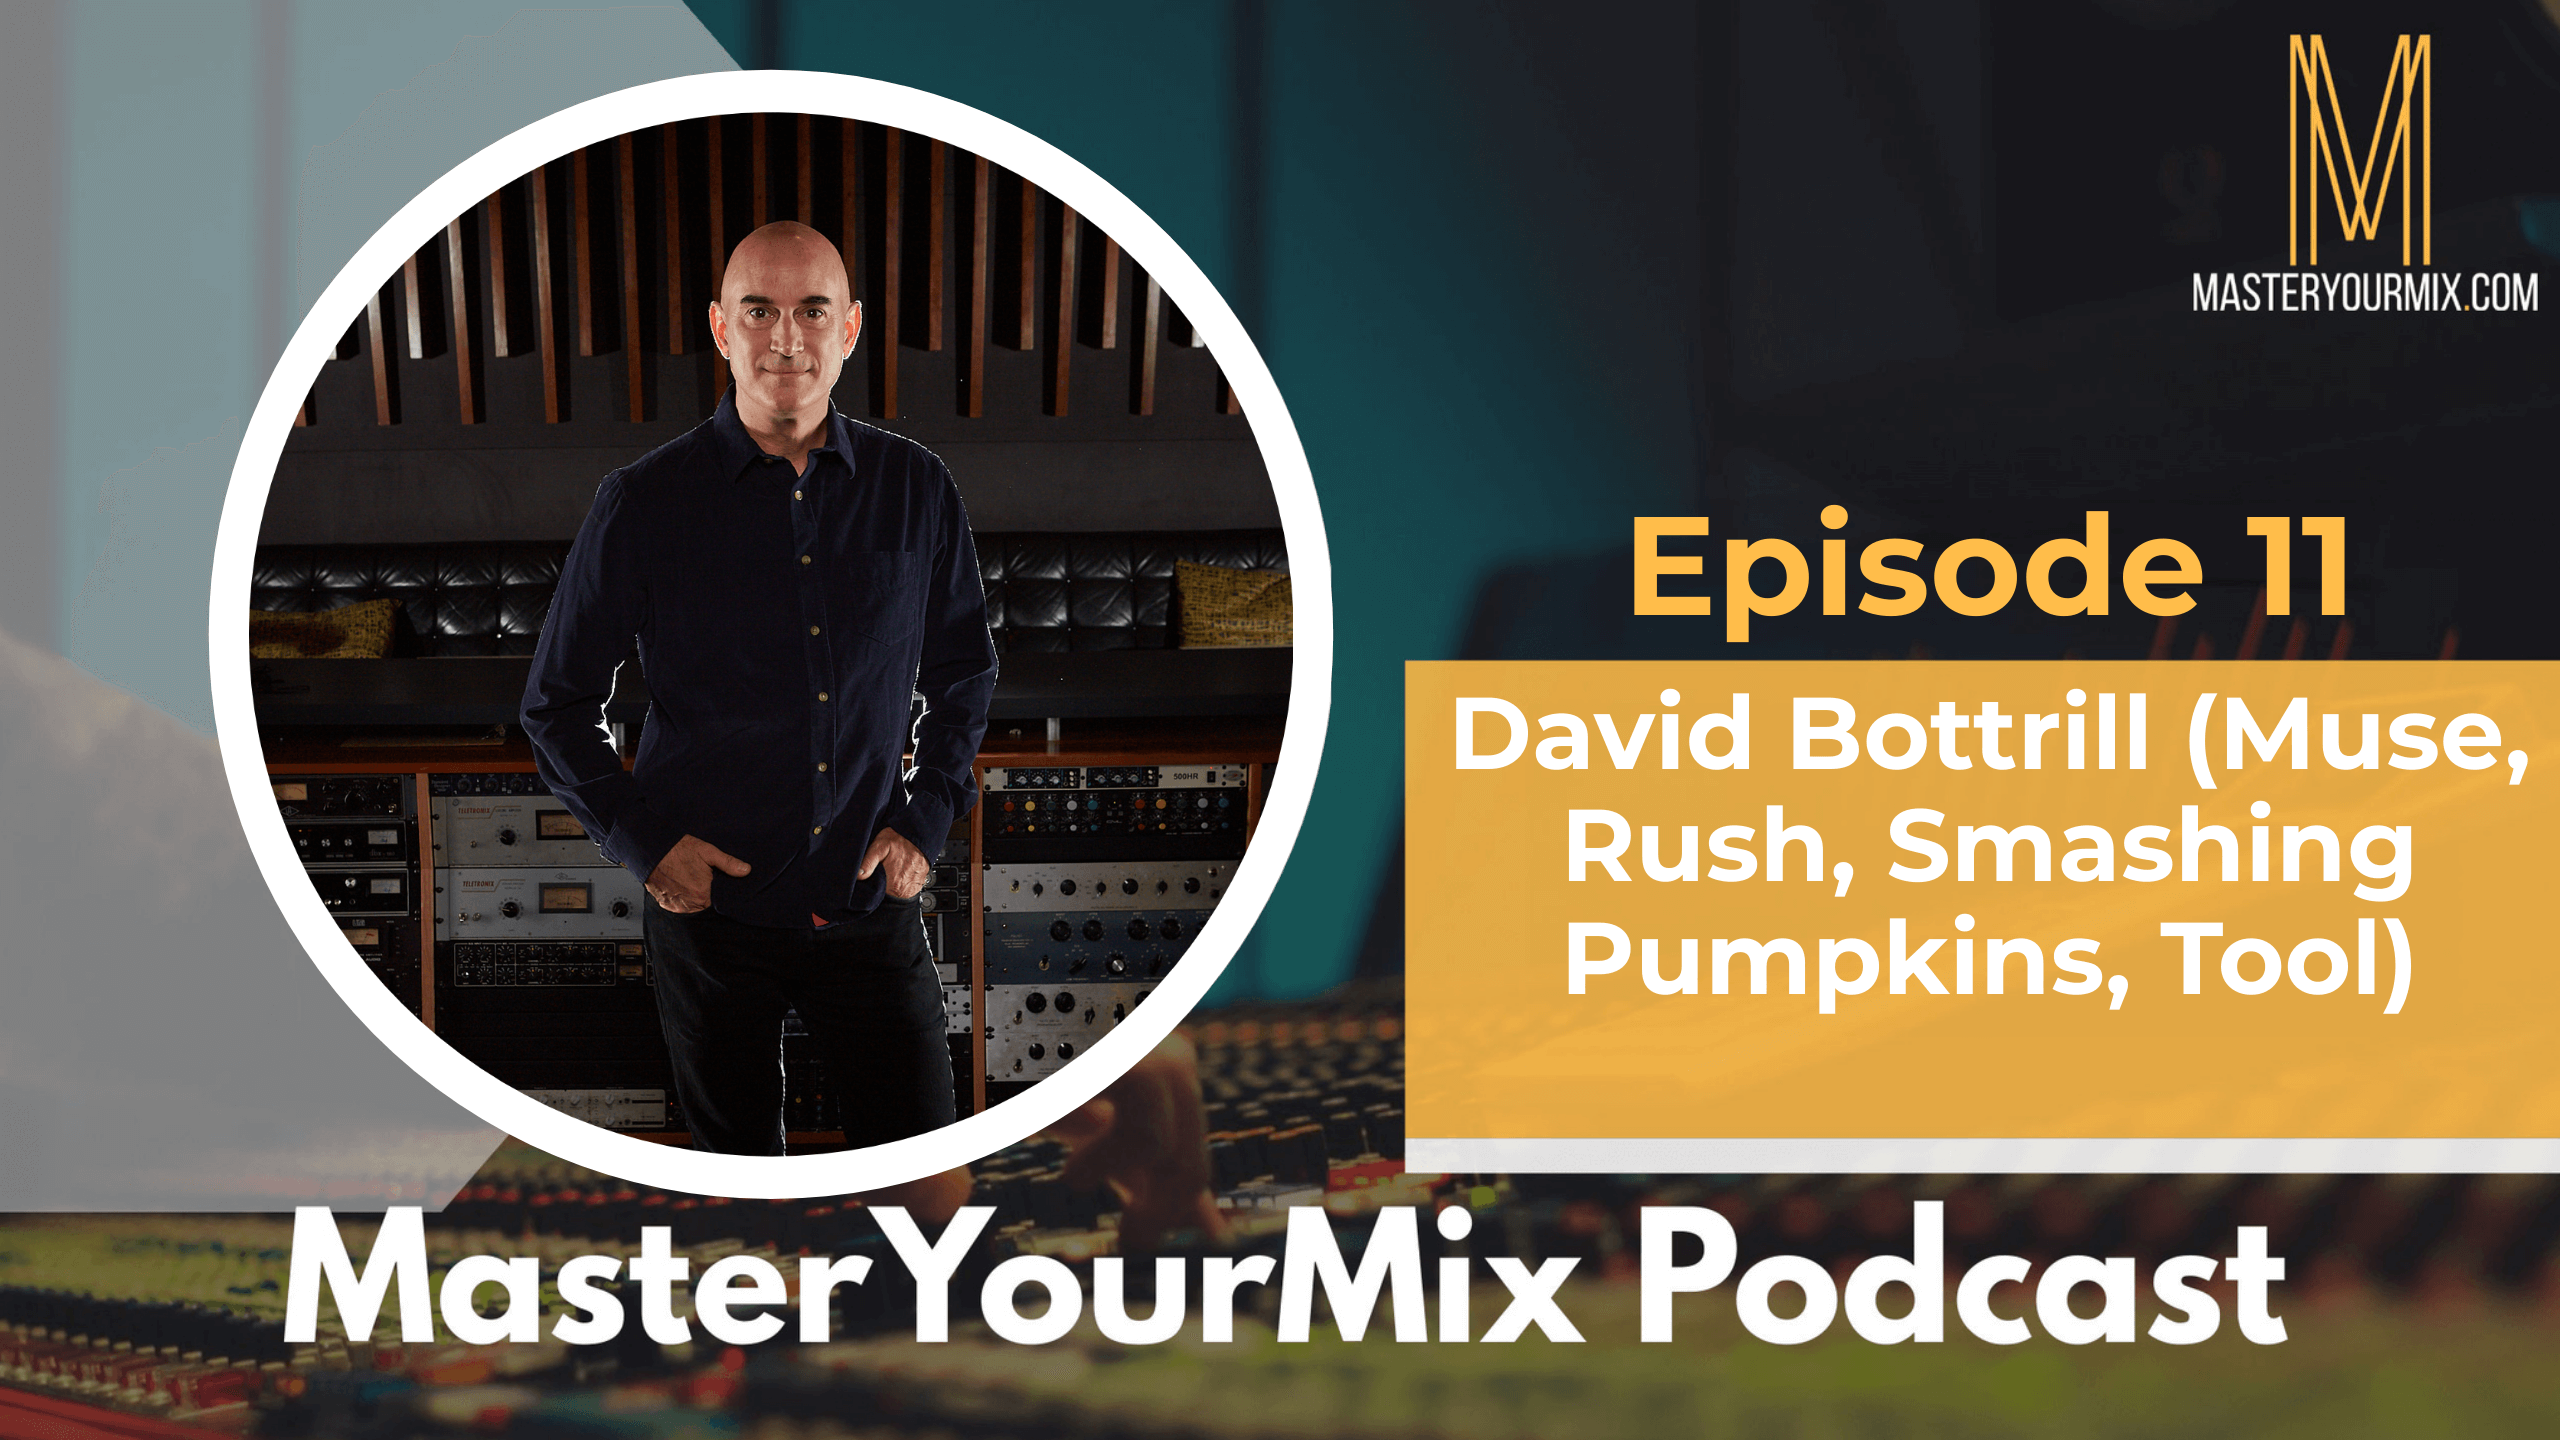 master your mix podcast, ep 11 david bottrill